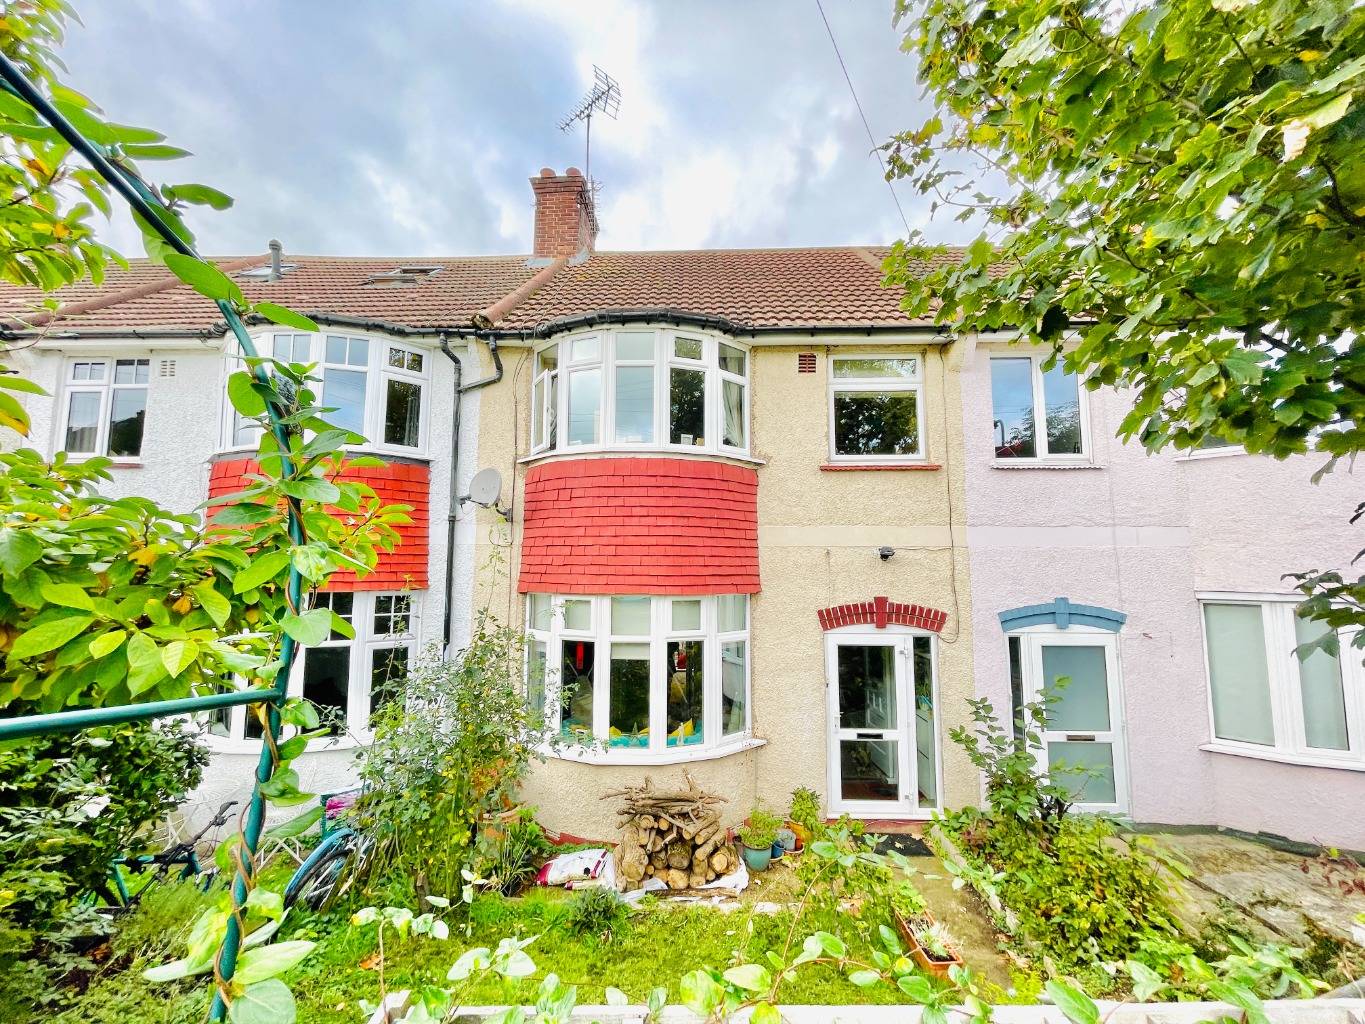 Situated on the Shooters Hill Slopes, this property benefits from views to 